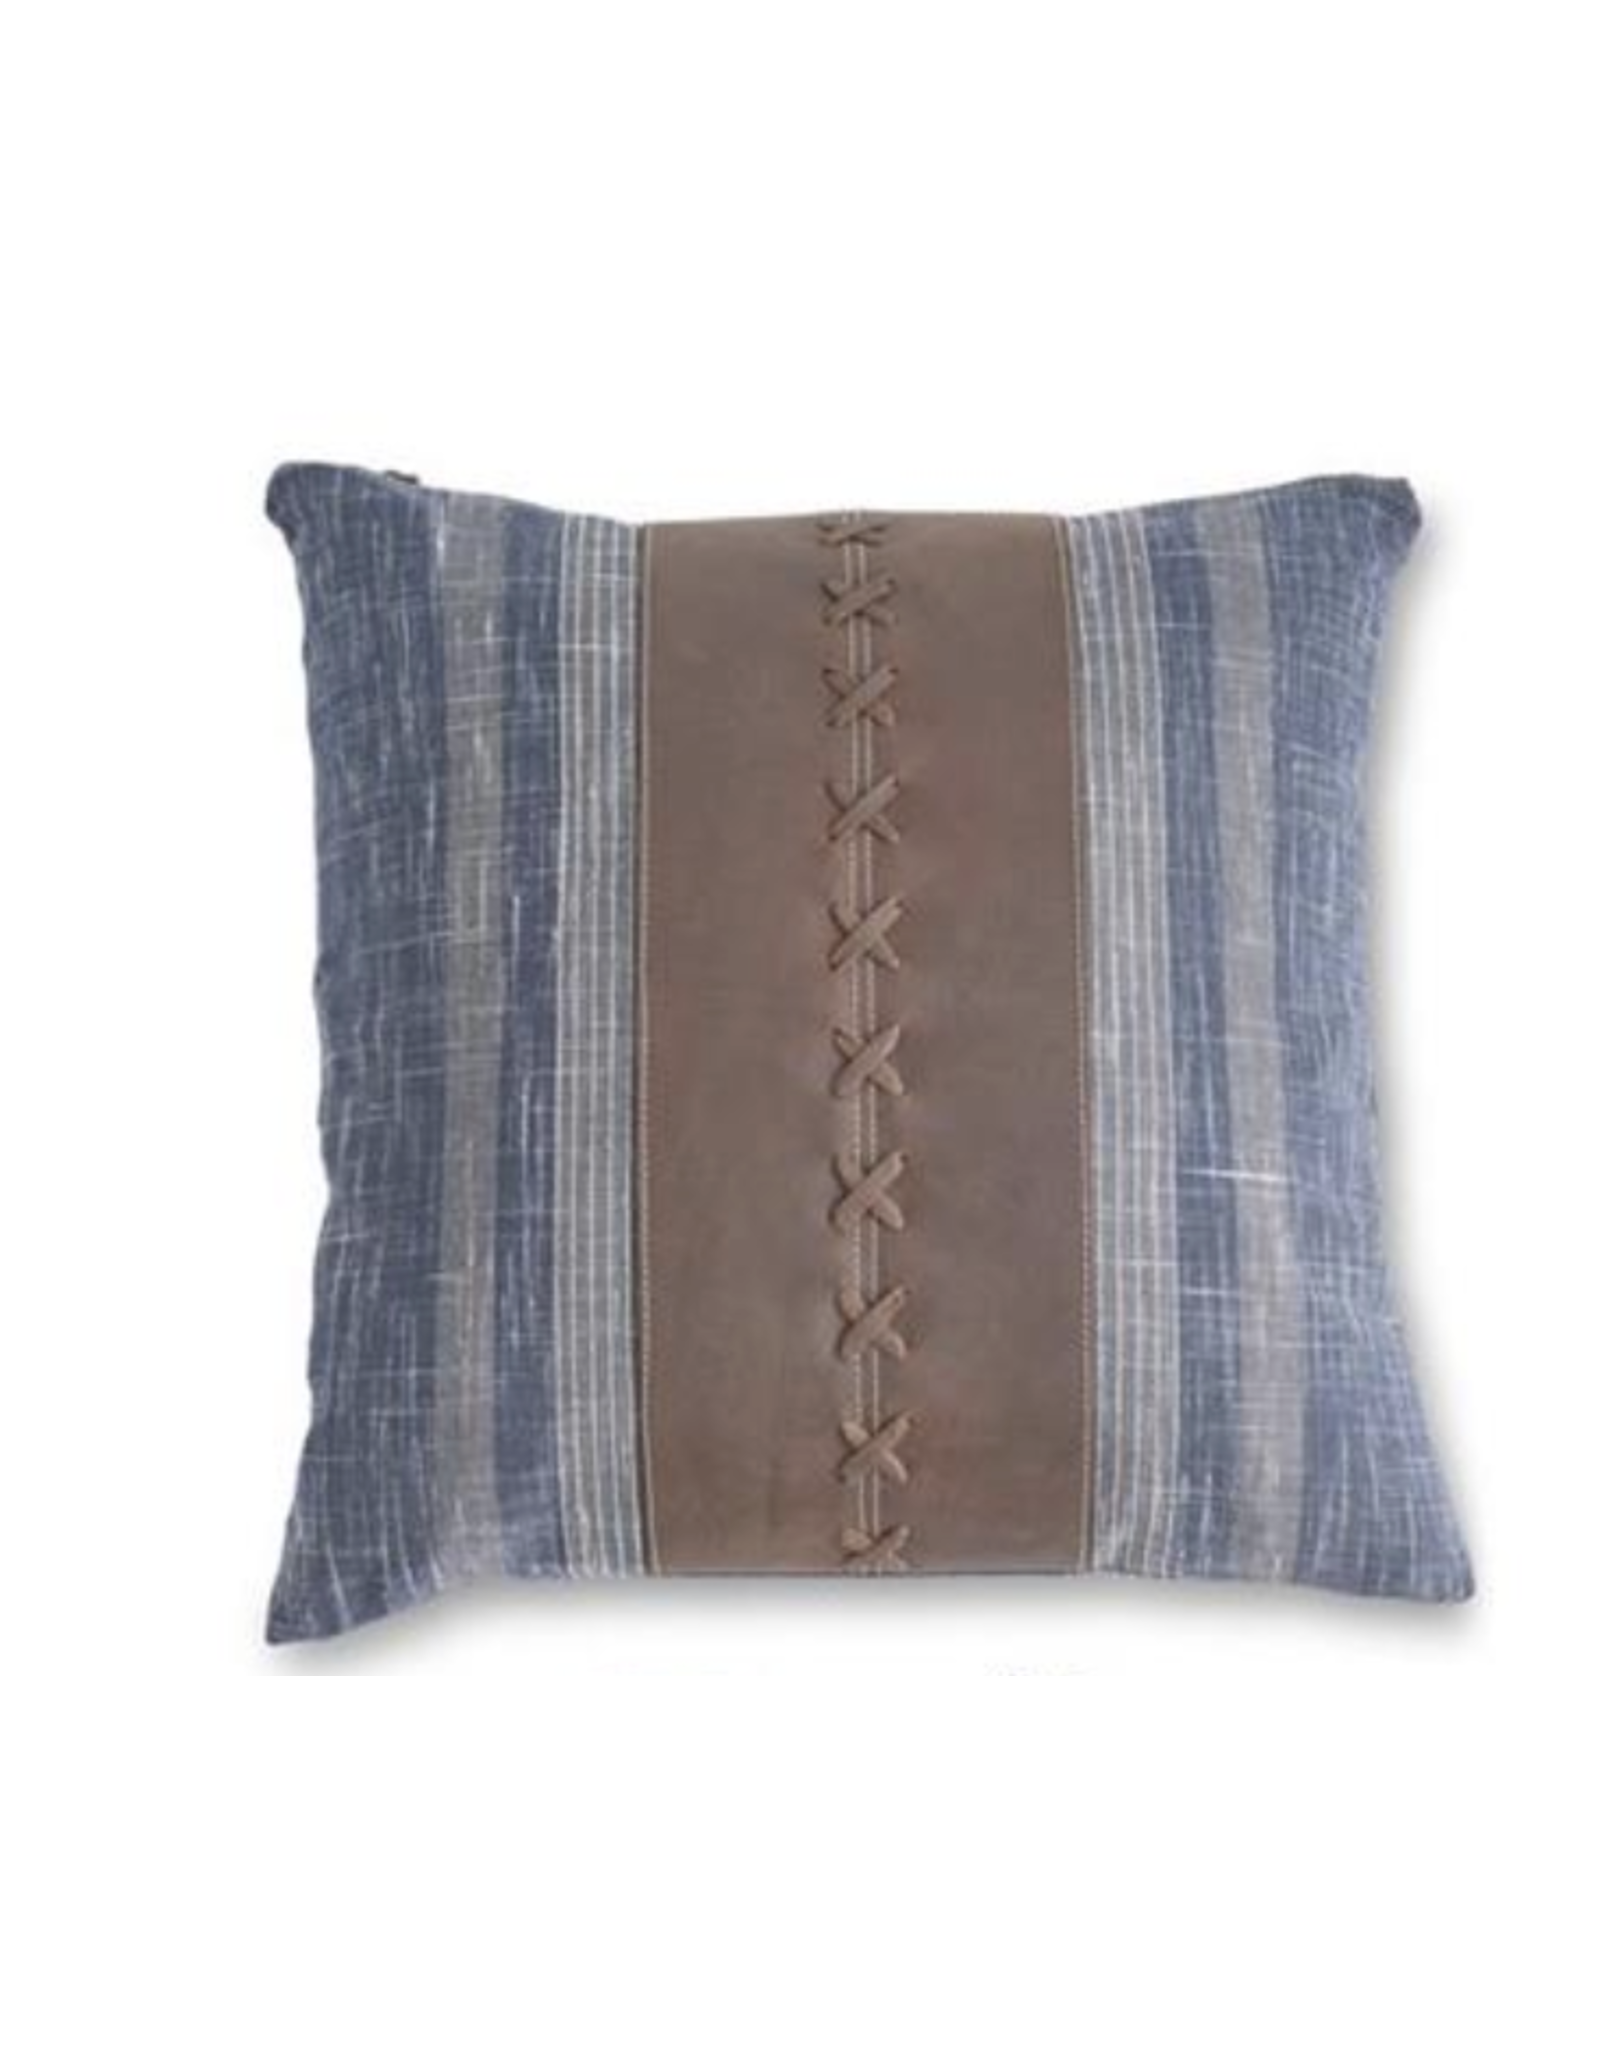 K & K 20" Square Pillow with Leather Accent